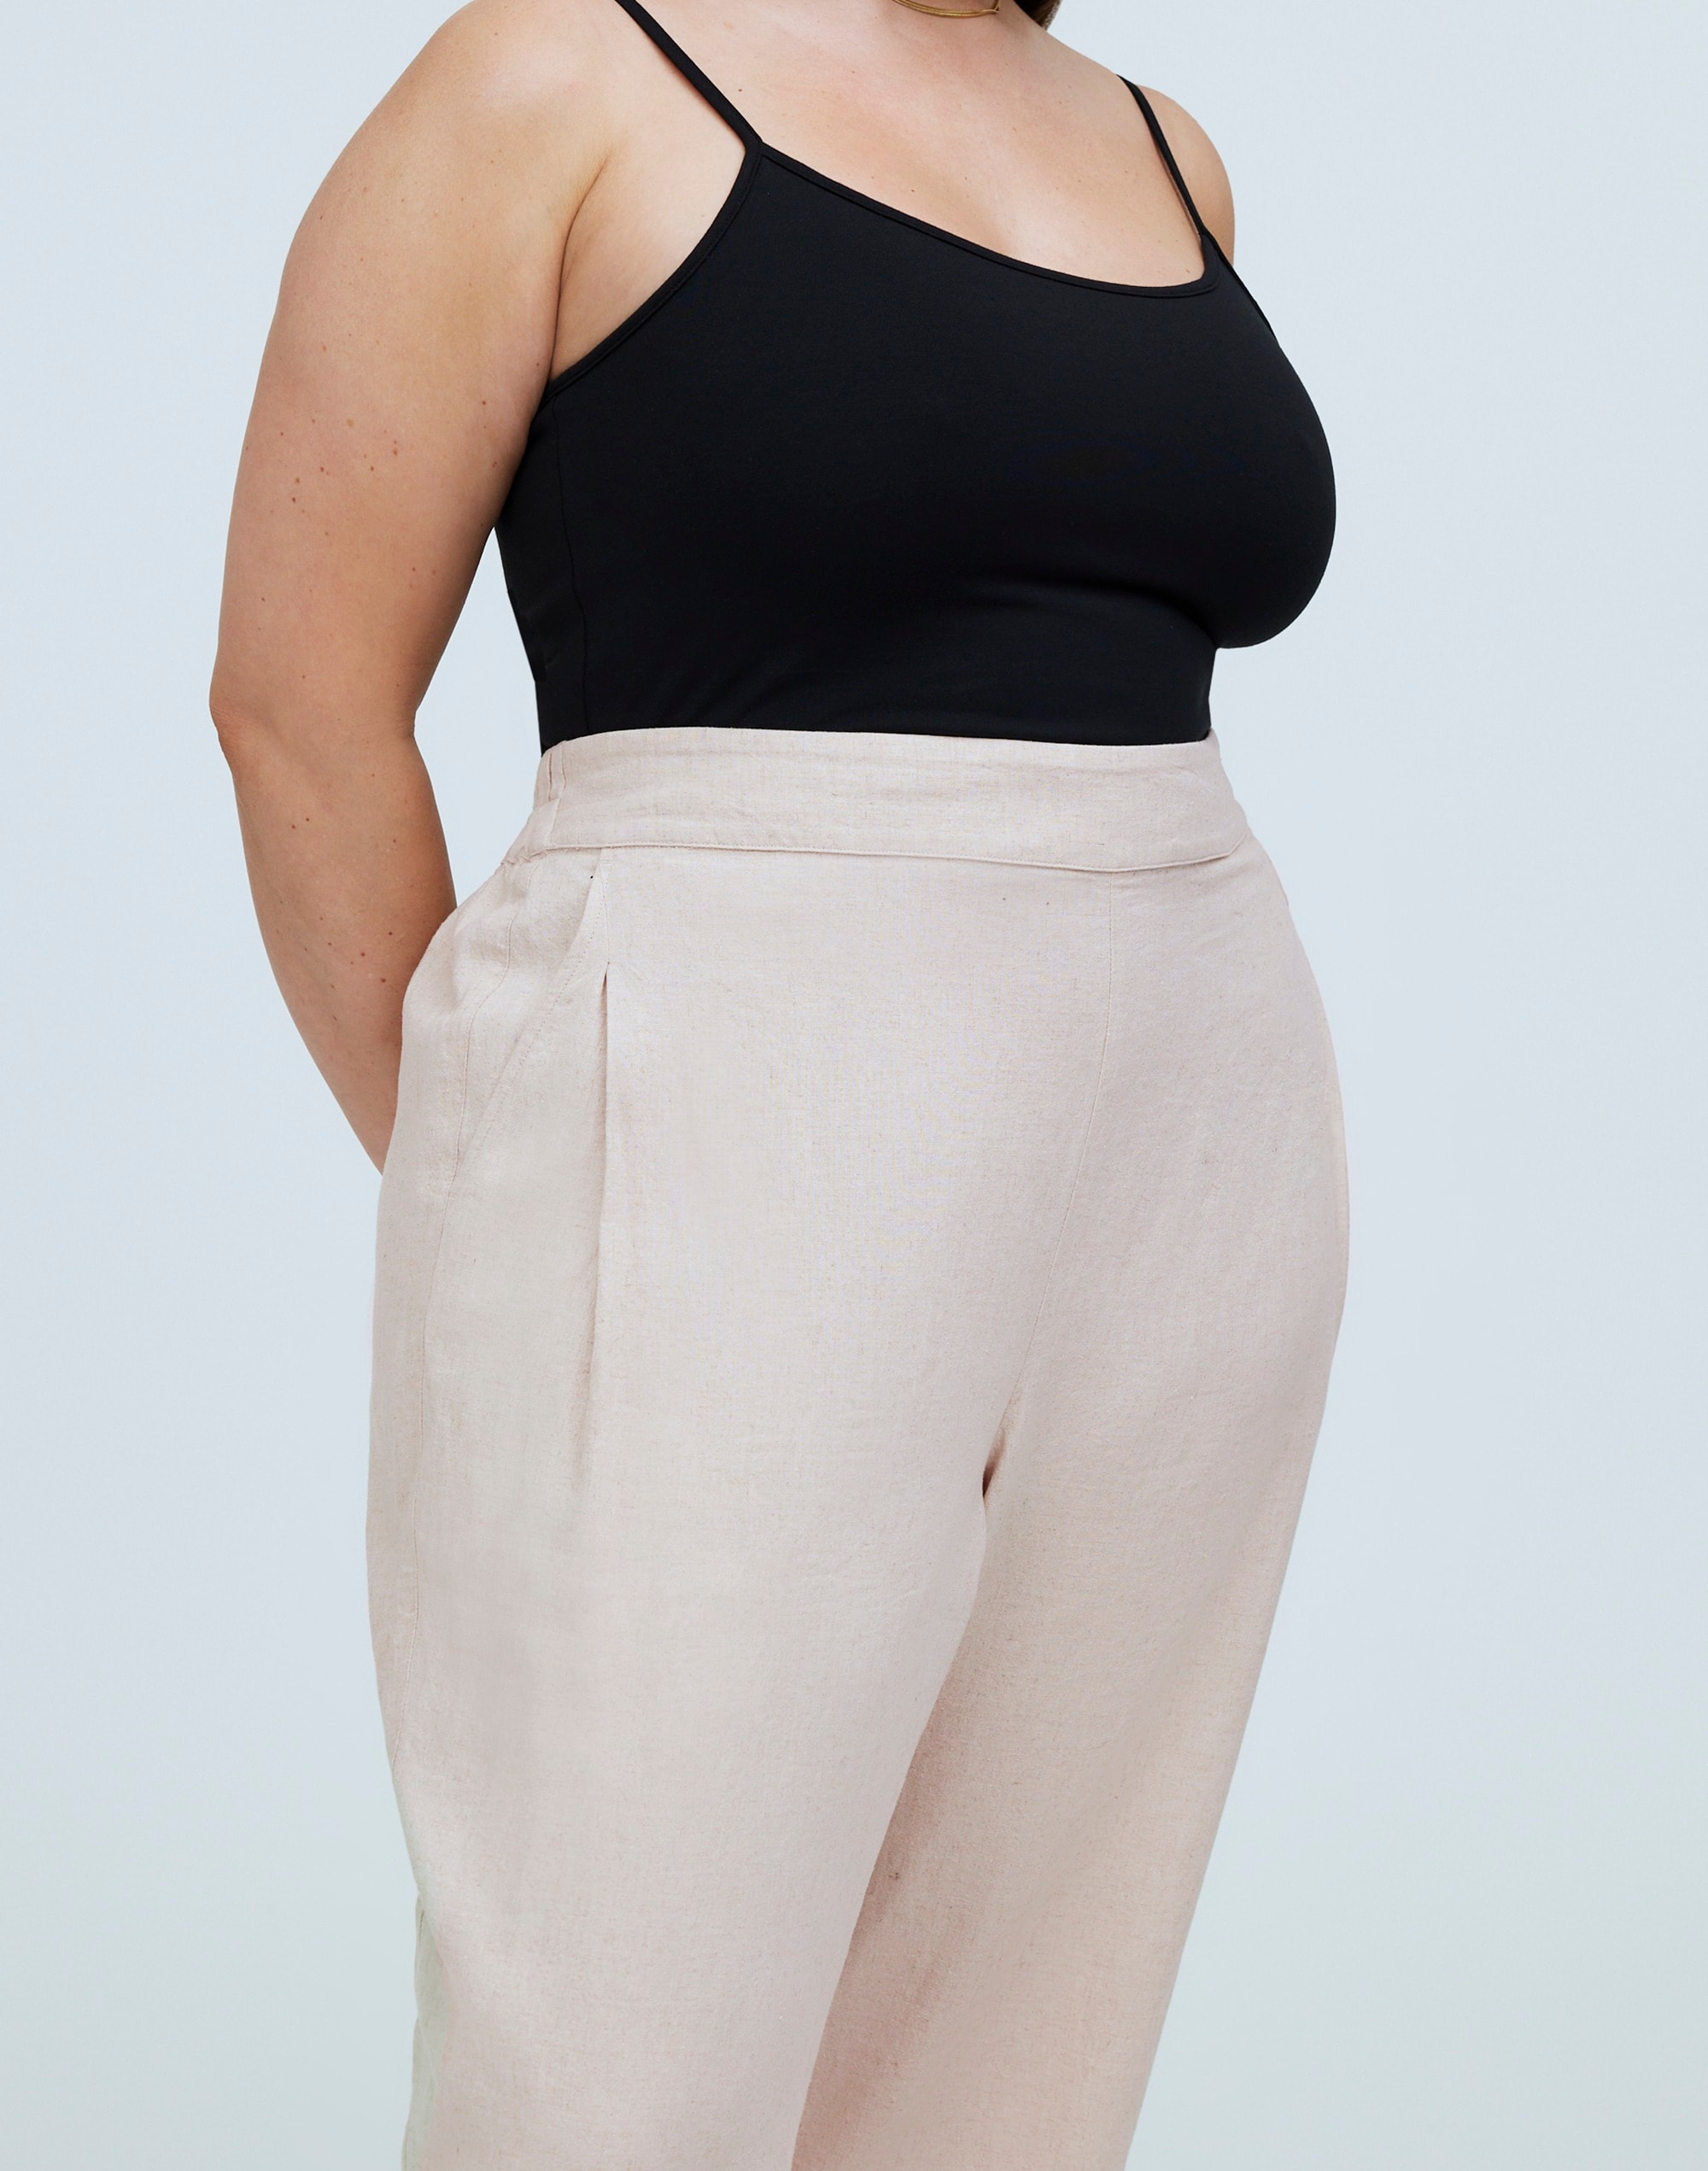 Plus Pull-On Straight Crop Pants in Linen Blend